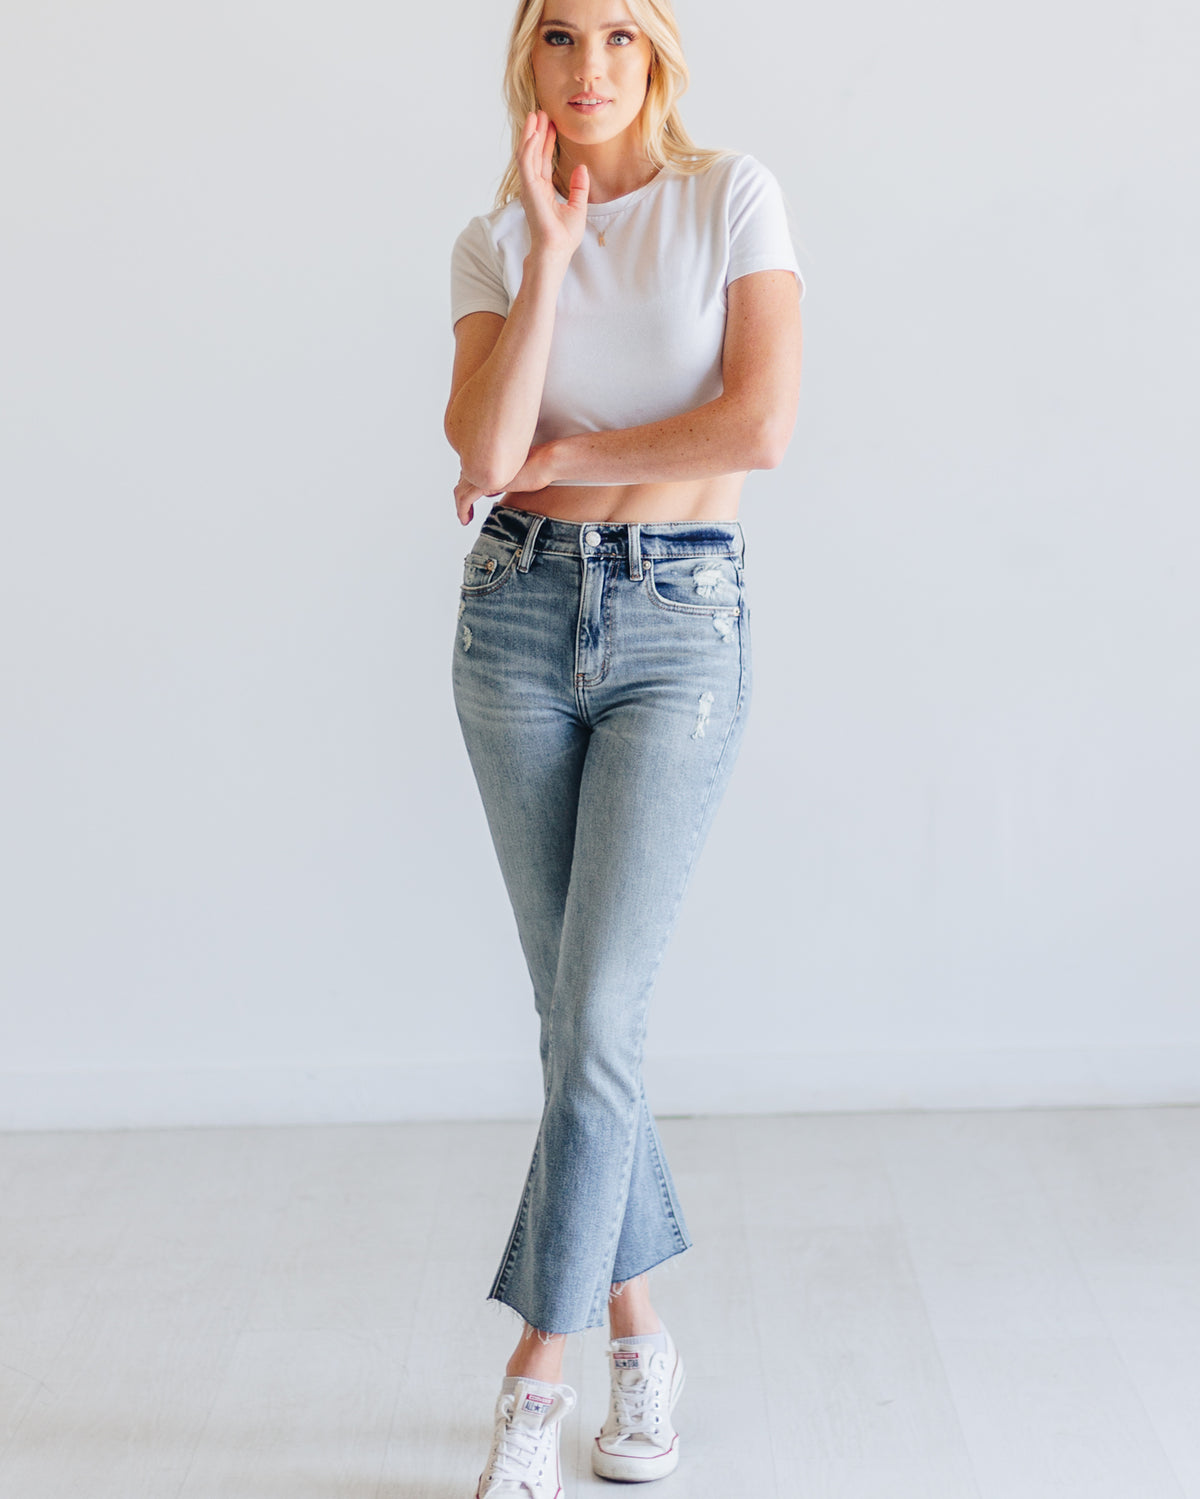 Shy Girl Jeans